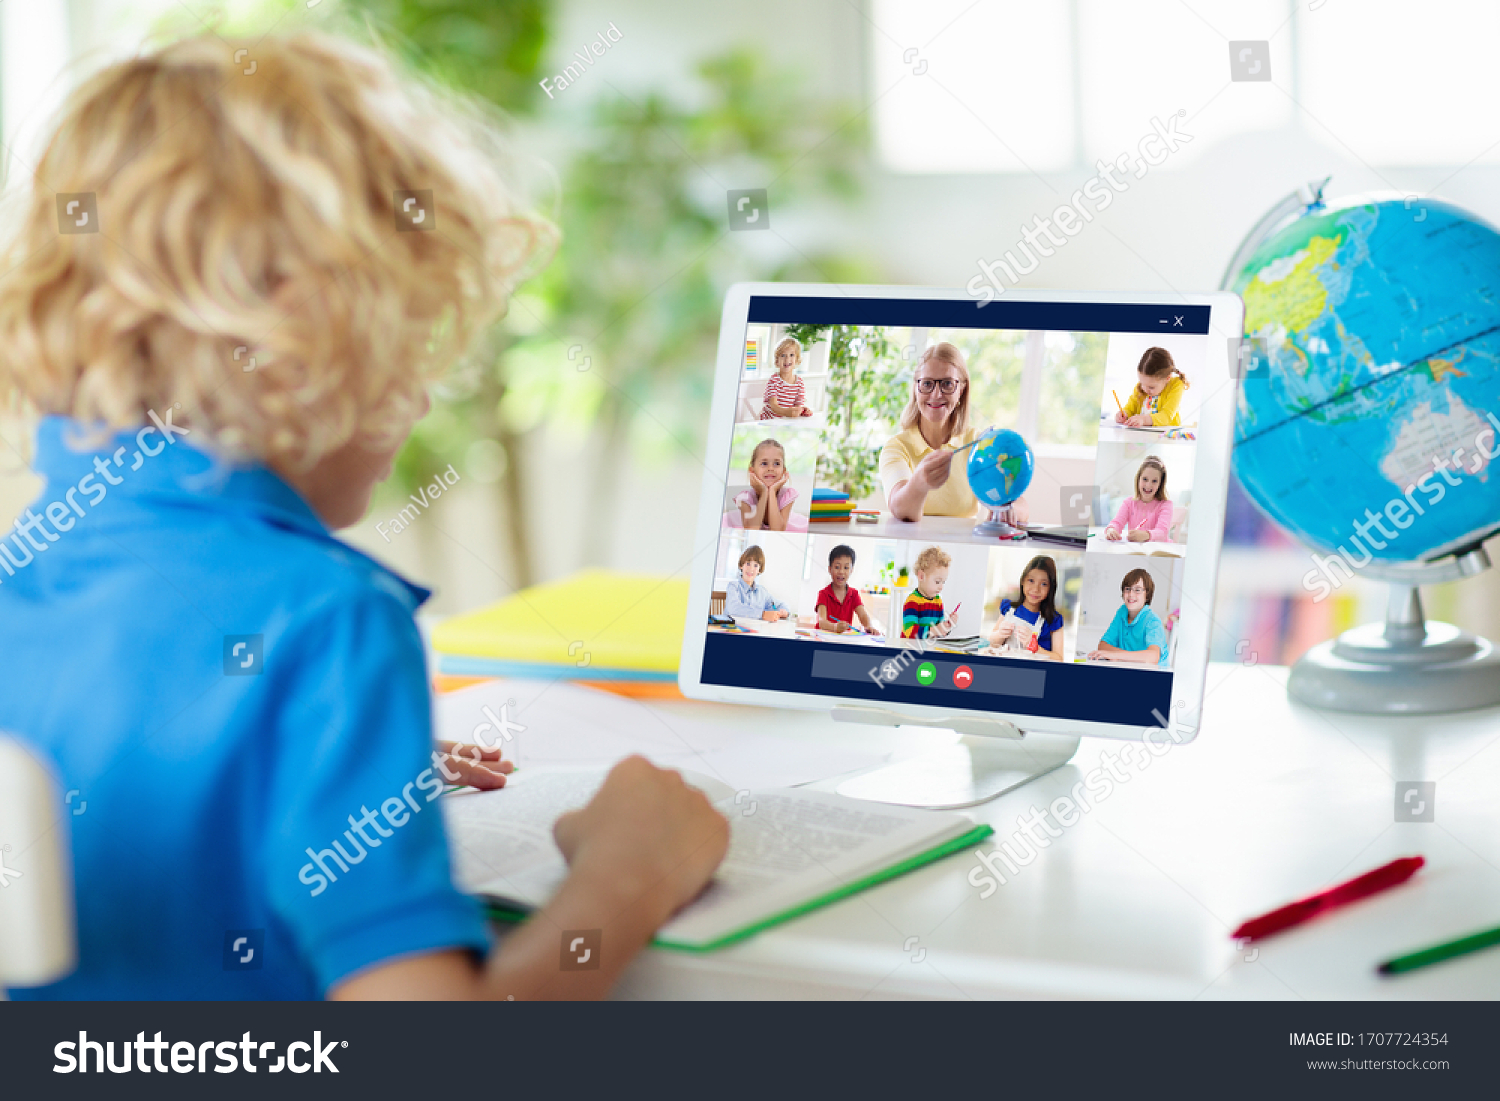 Online remote learning. School kids with computer having video conference chat with teacher and class group. Child studying from home. Homeschooling during quarantine and coronavirus outbreak. #1707724354